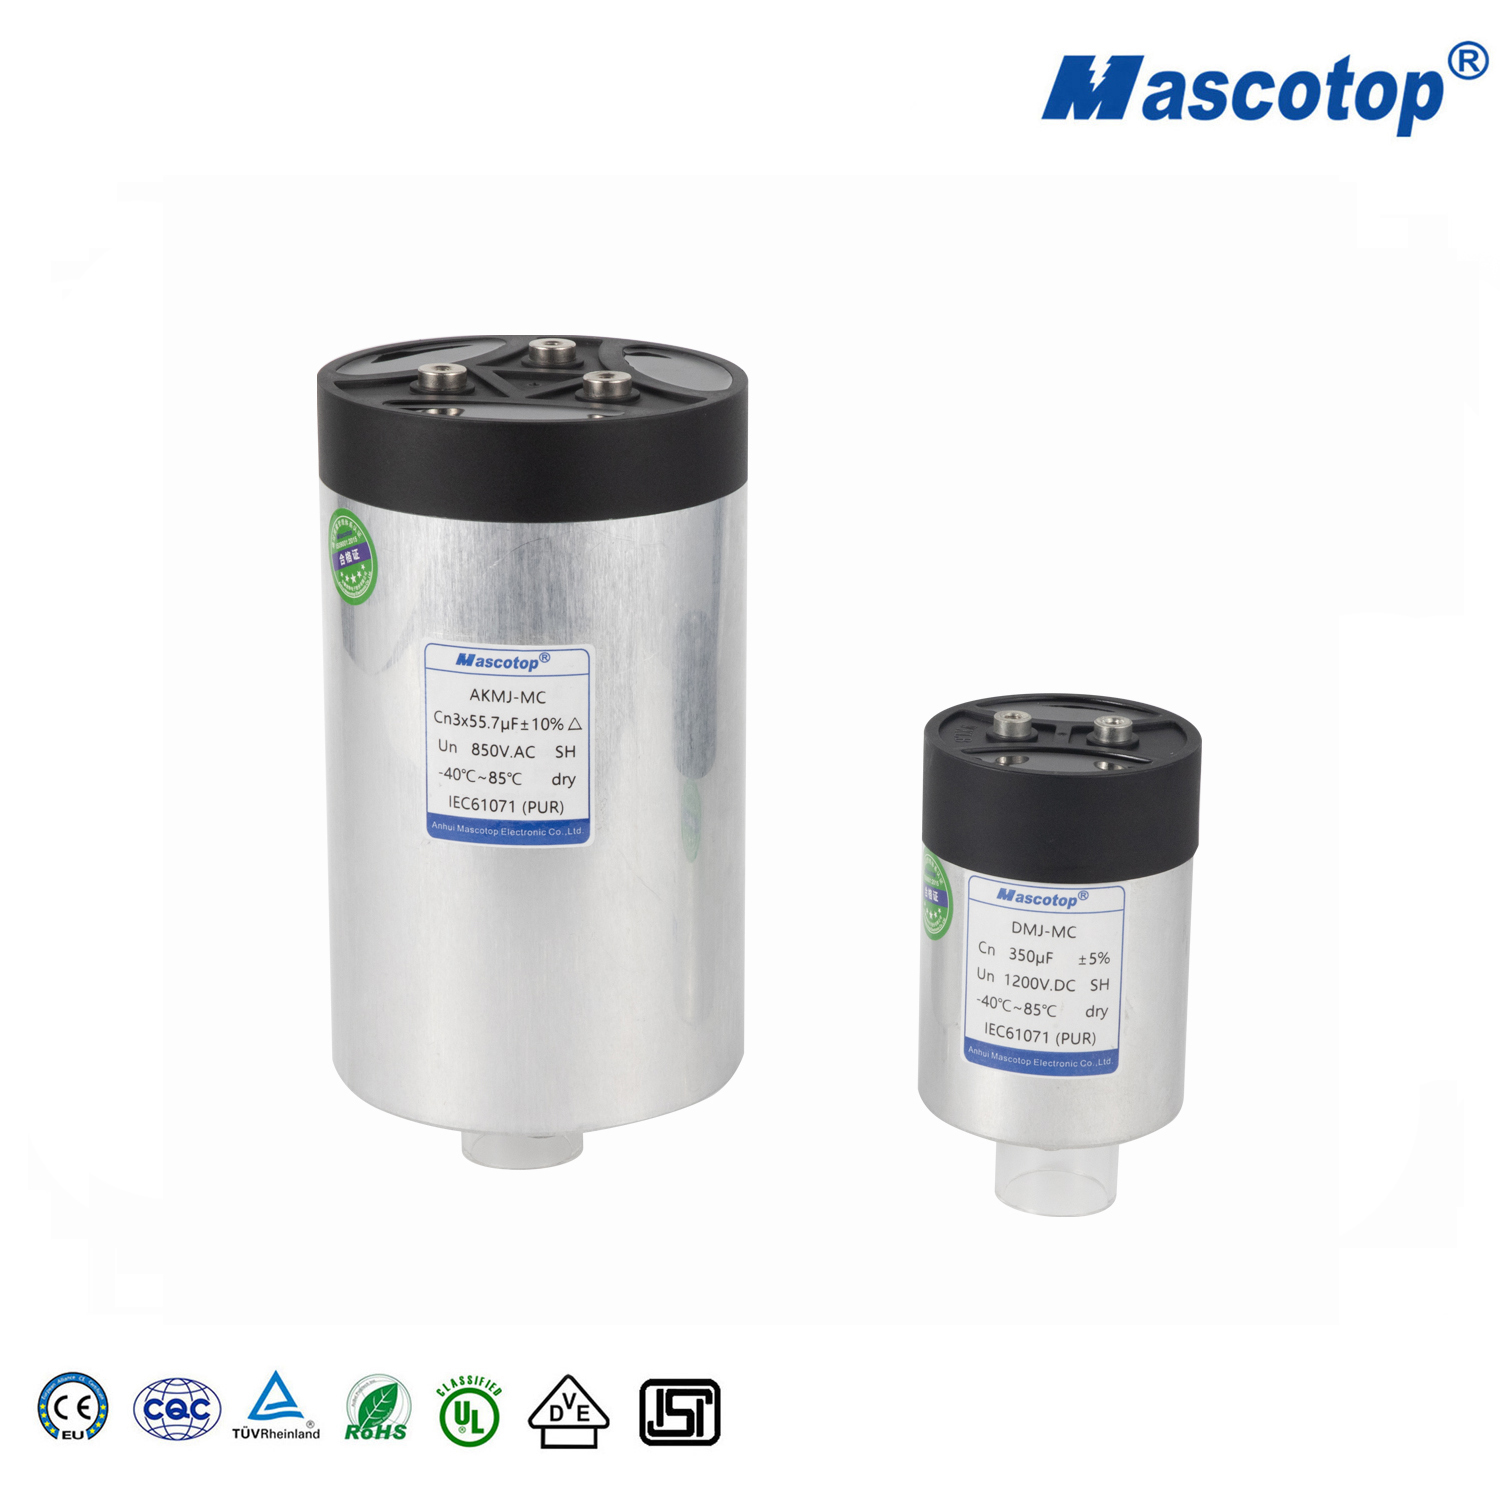 DC LINK FILTER CAPACITOR- มาสคอต